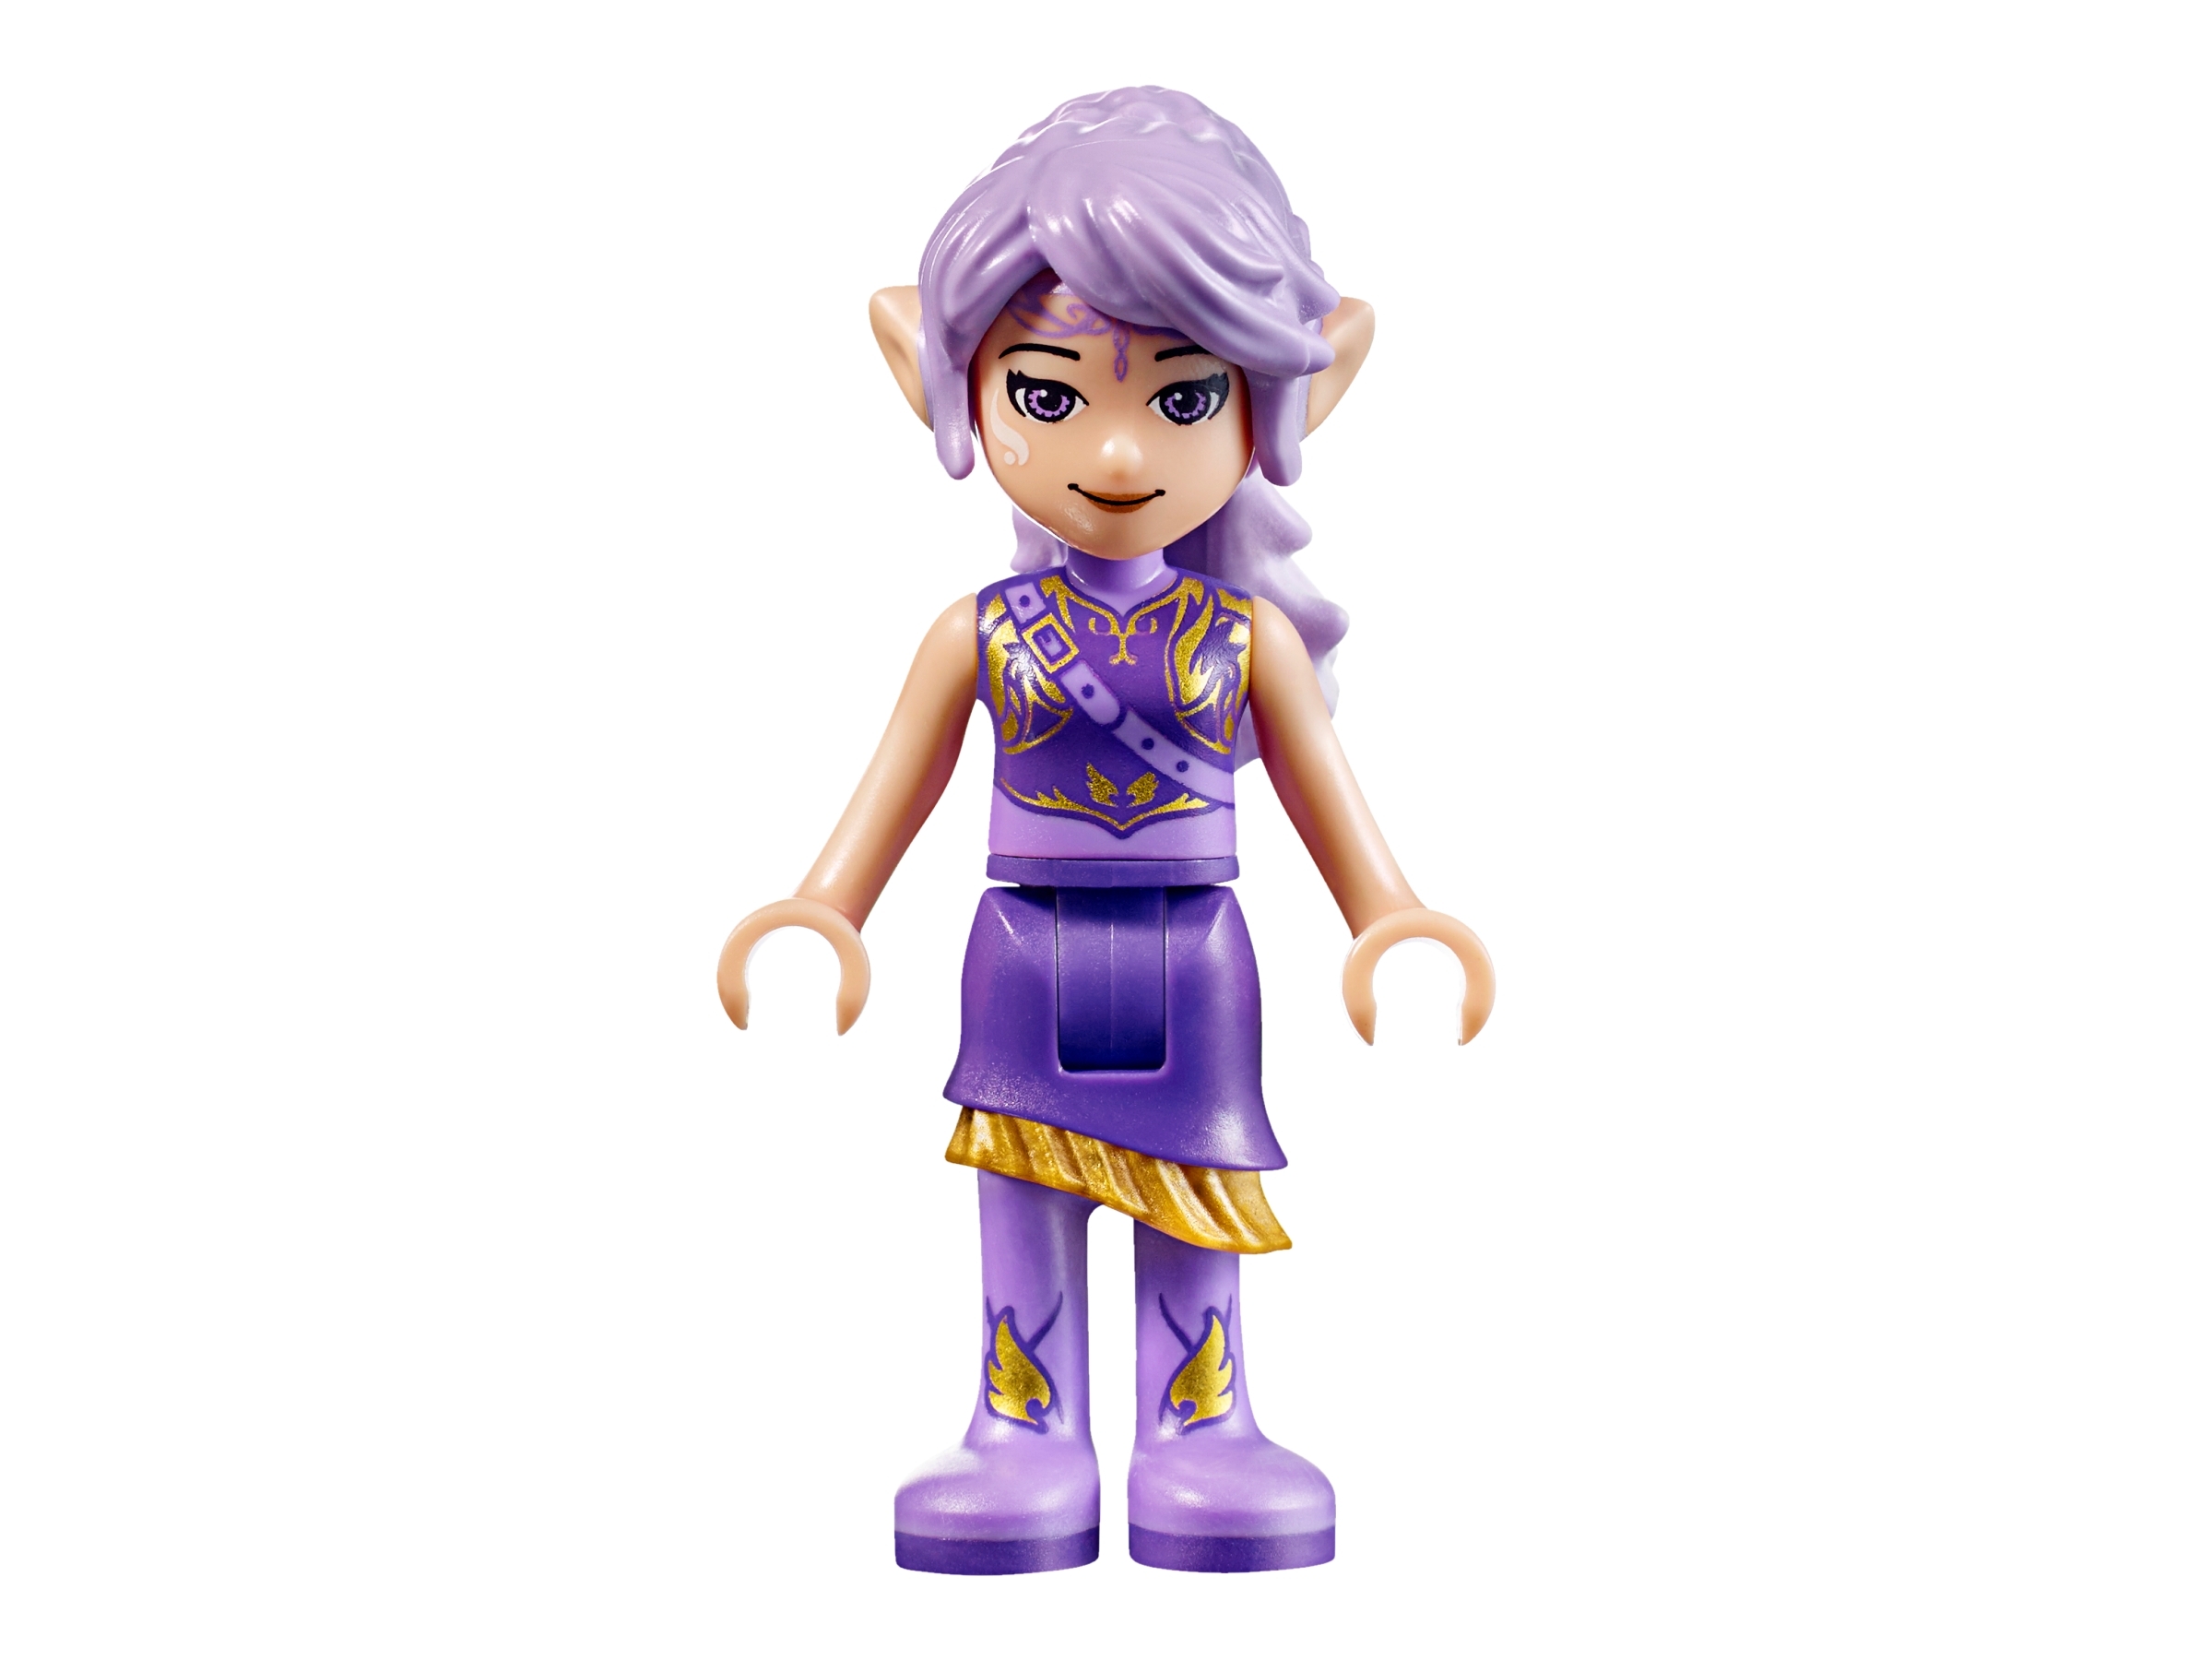 Aira & the Song of the Dragon 41193 | Elves | Buy online at the Official LEGO® US